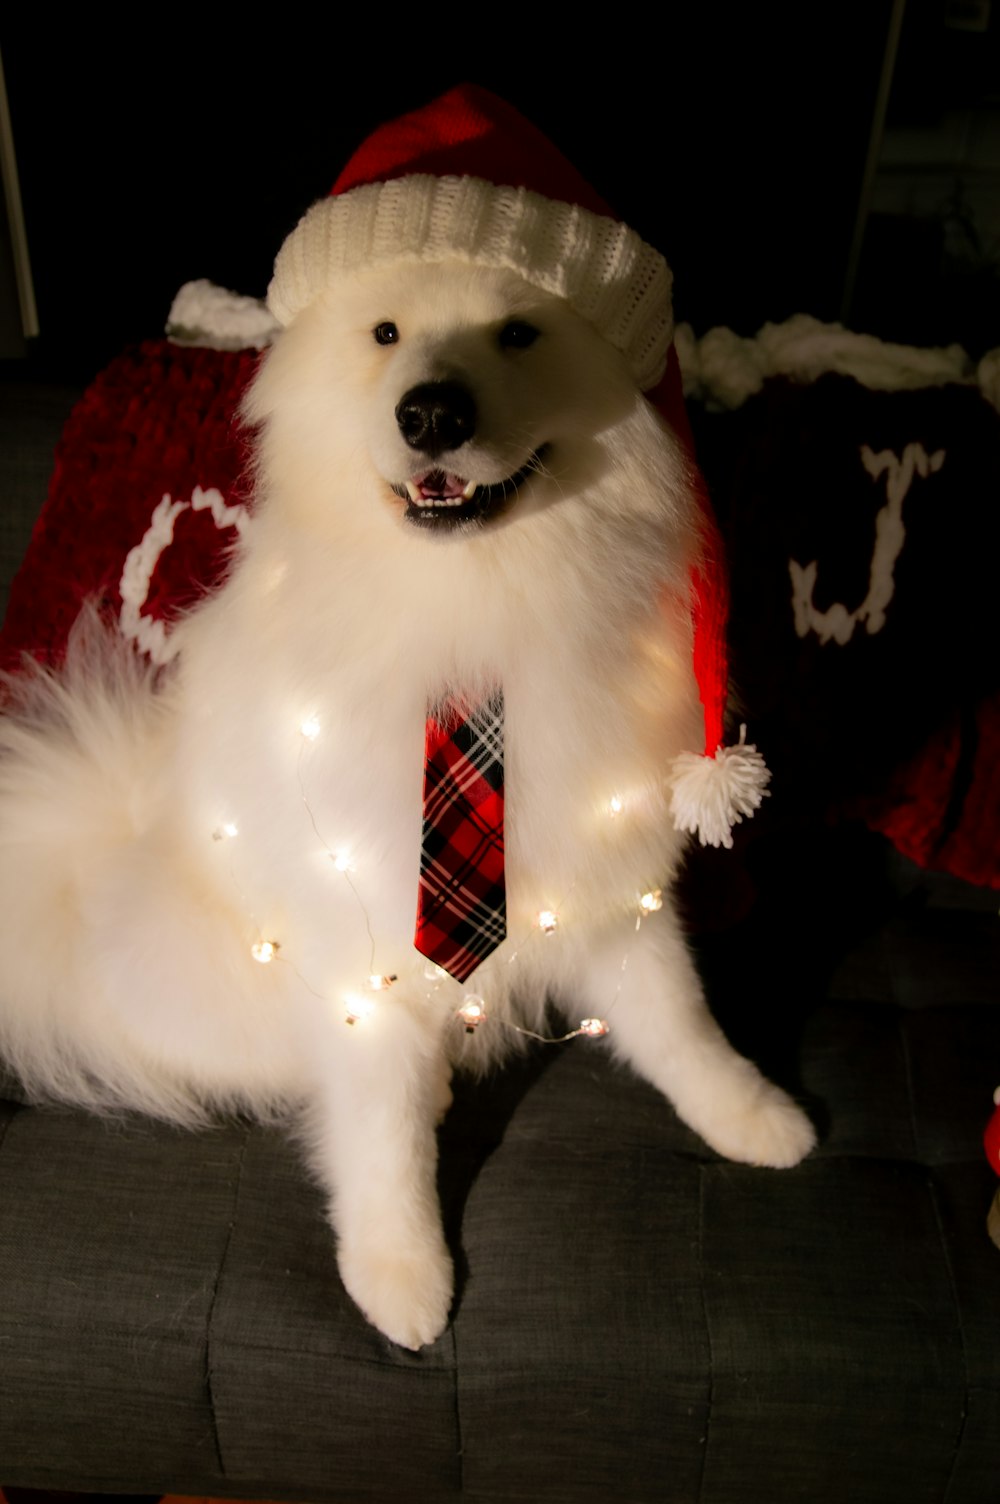 a white dog wearing a red tie and a santa hat